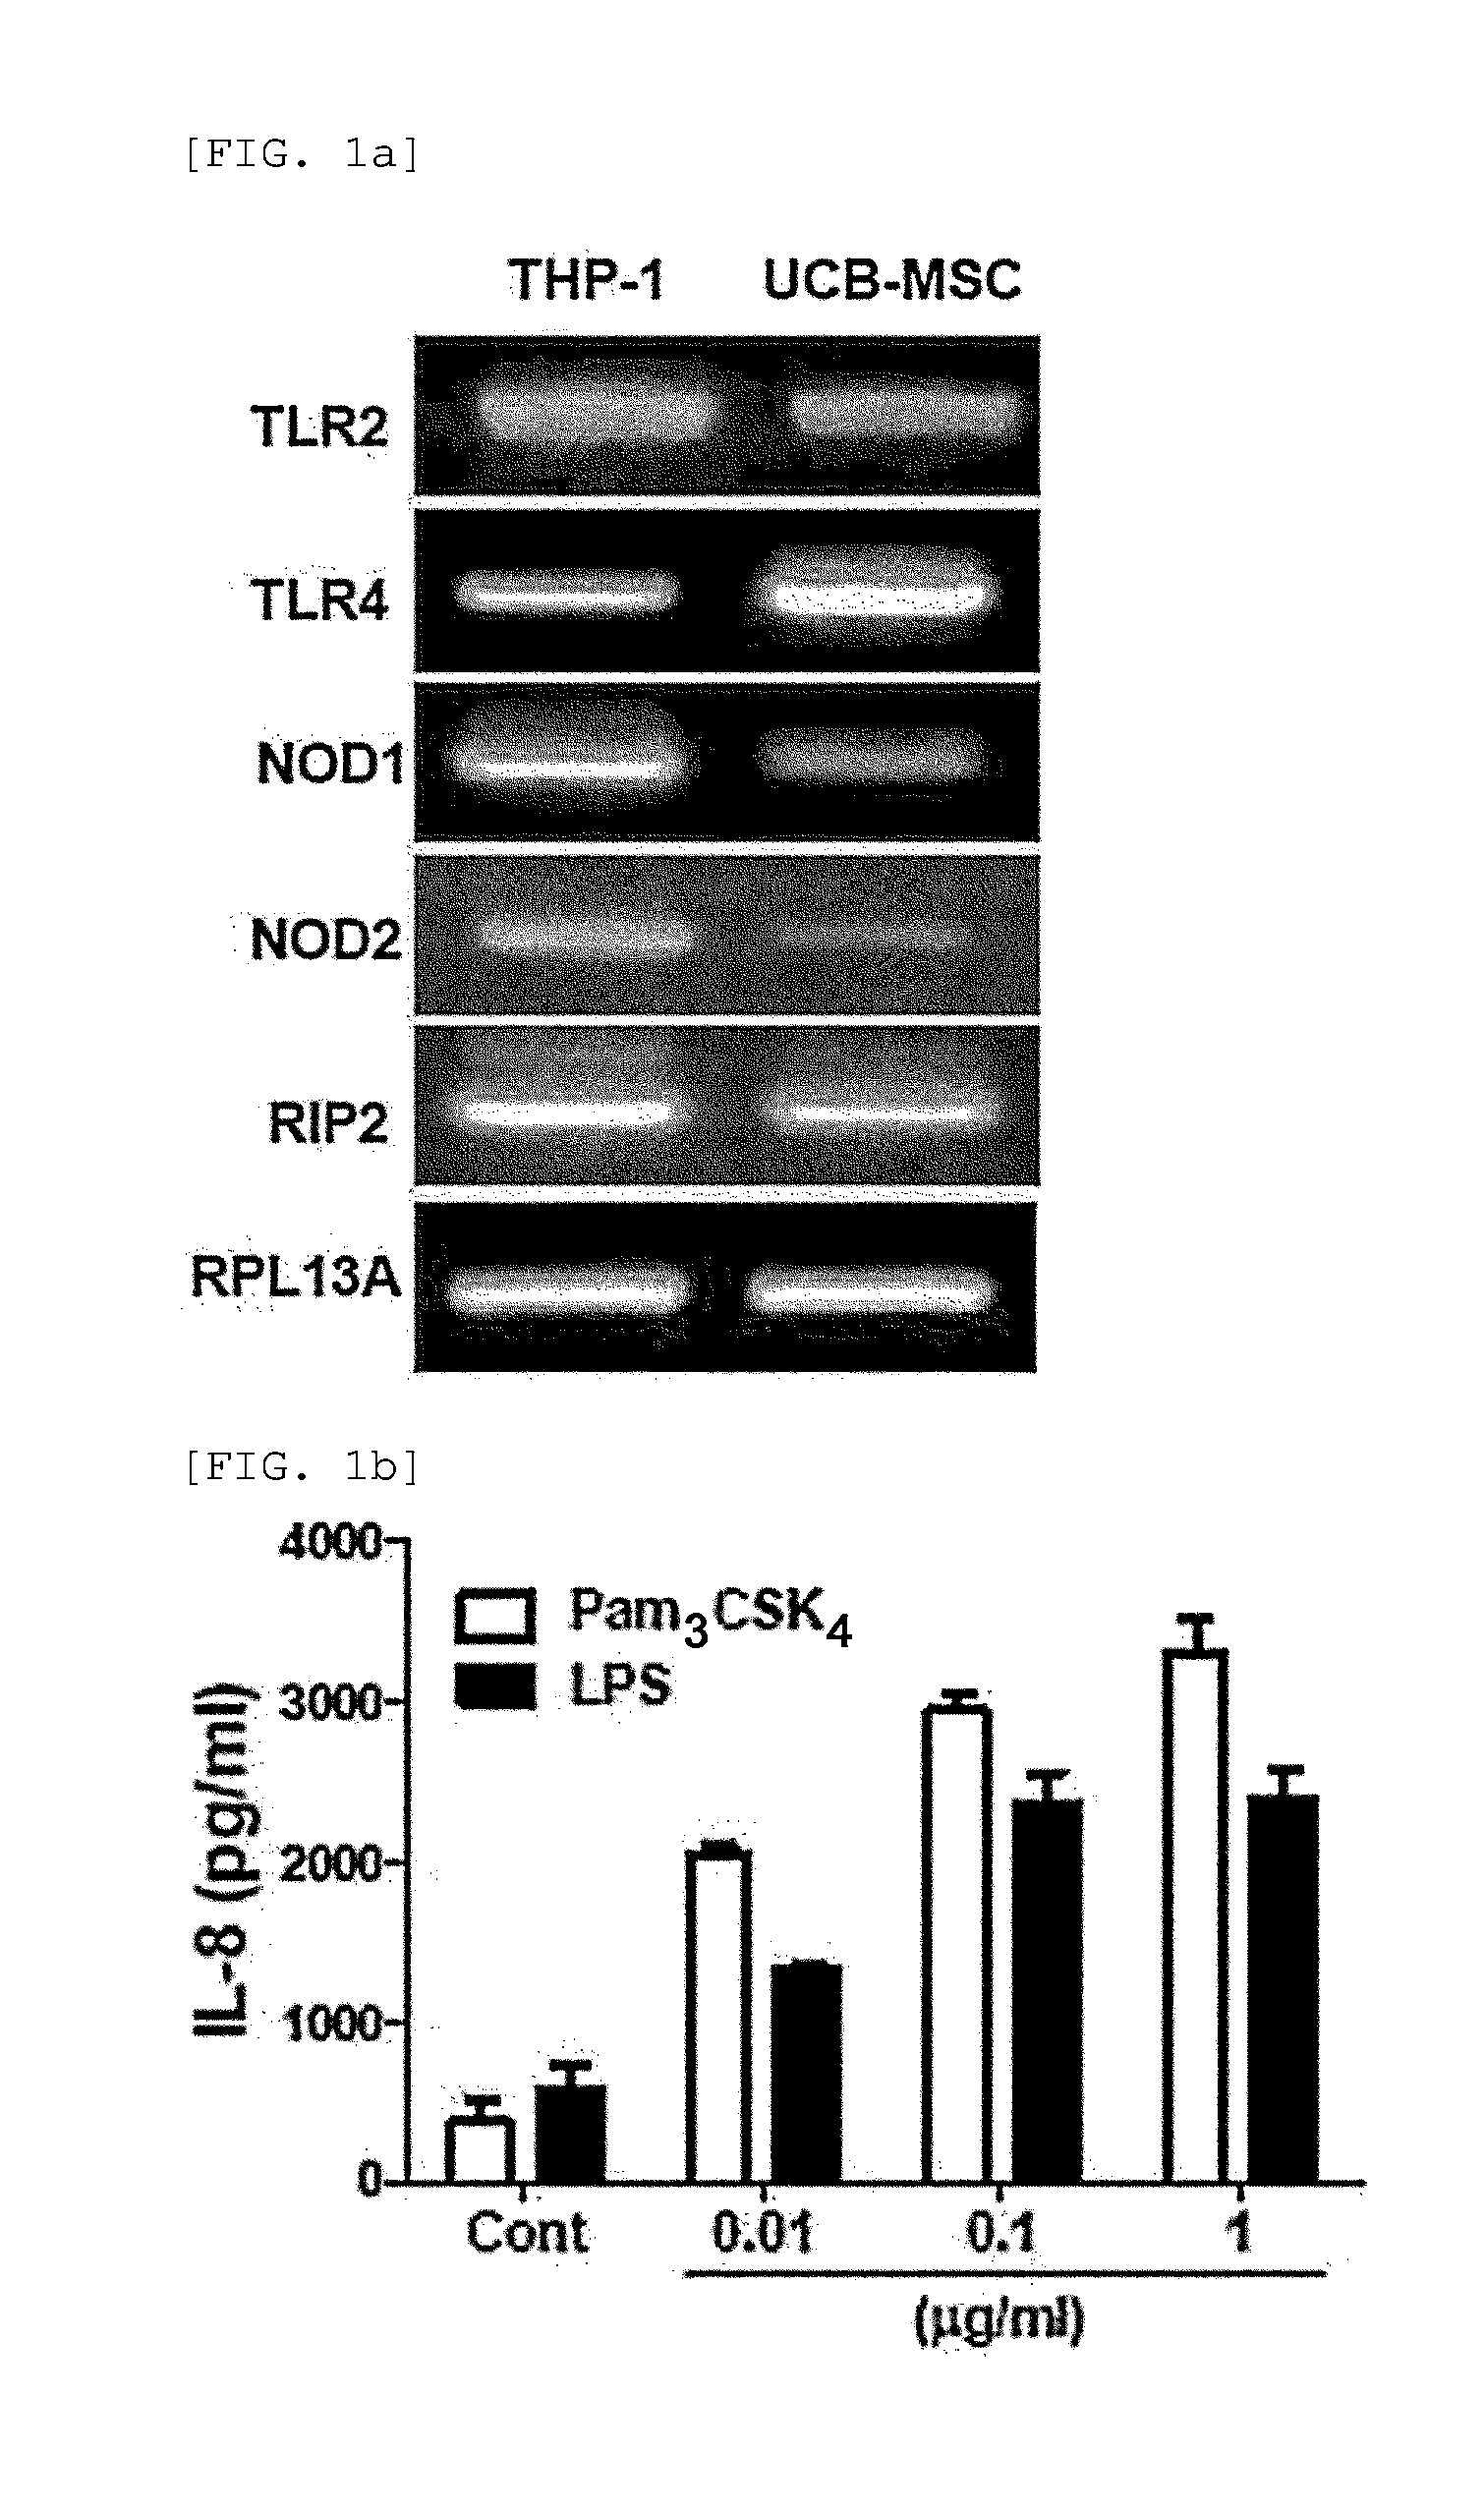 "Pharmaceutical Composition Comprising Stem Cells Treated with NOD2 Agonist or Culture Thereof for Prevention and Treatment of Immune Disorders and Inflammatory Diseases"